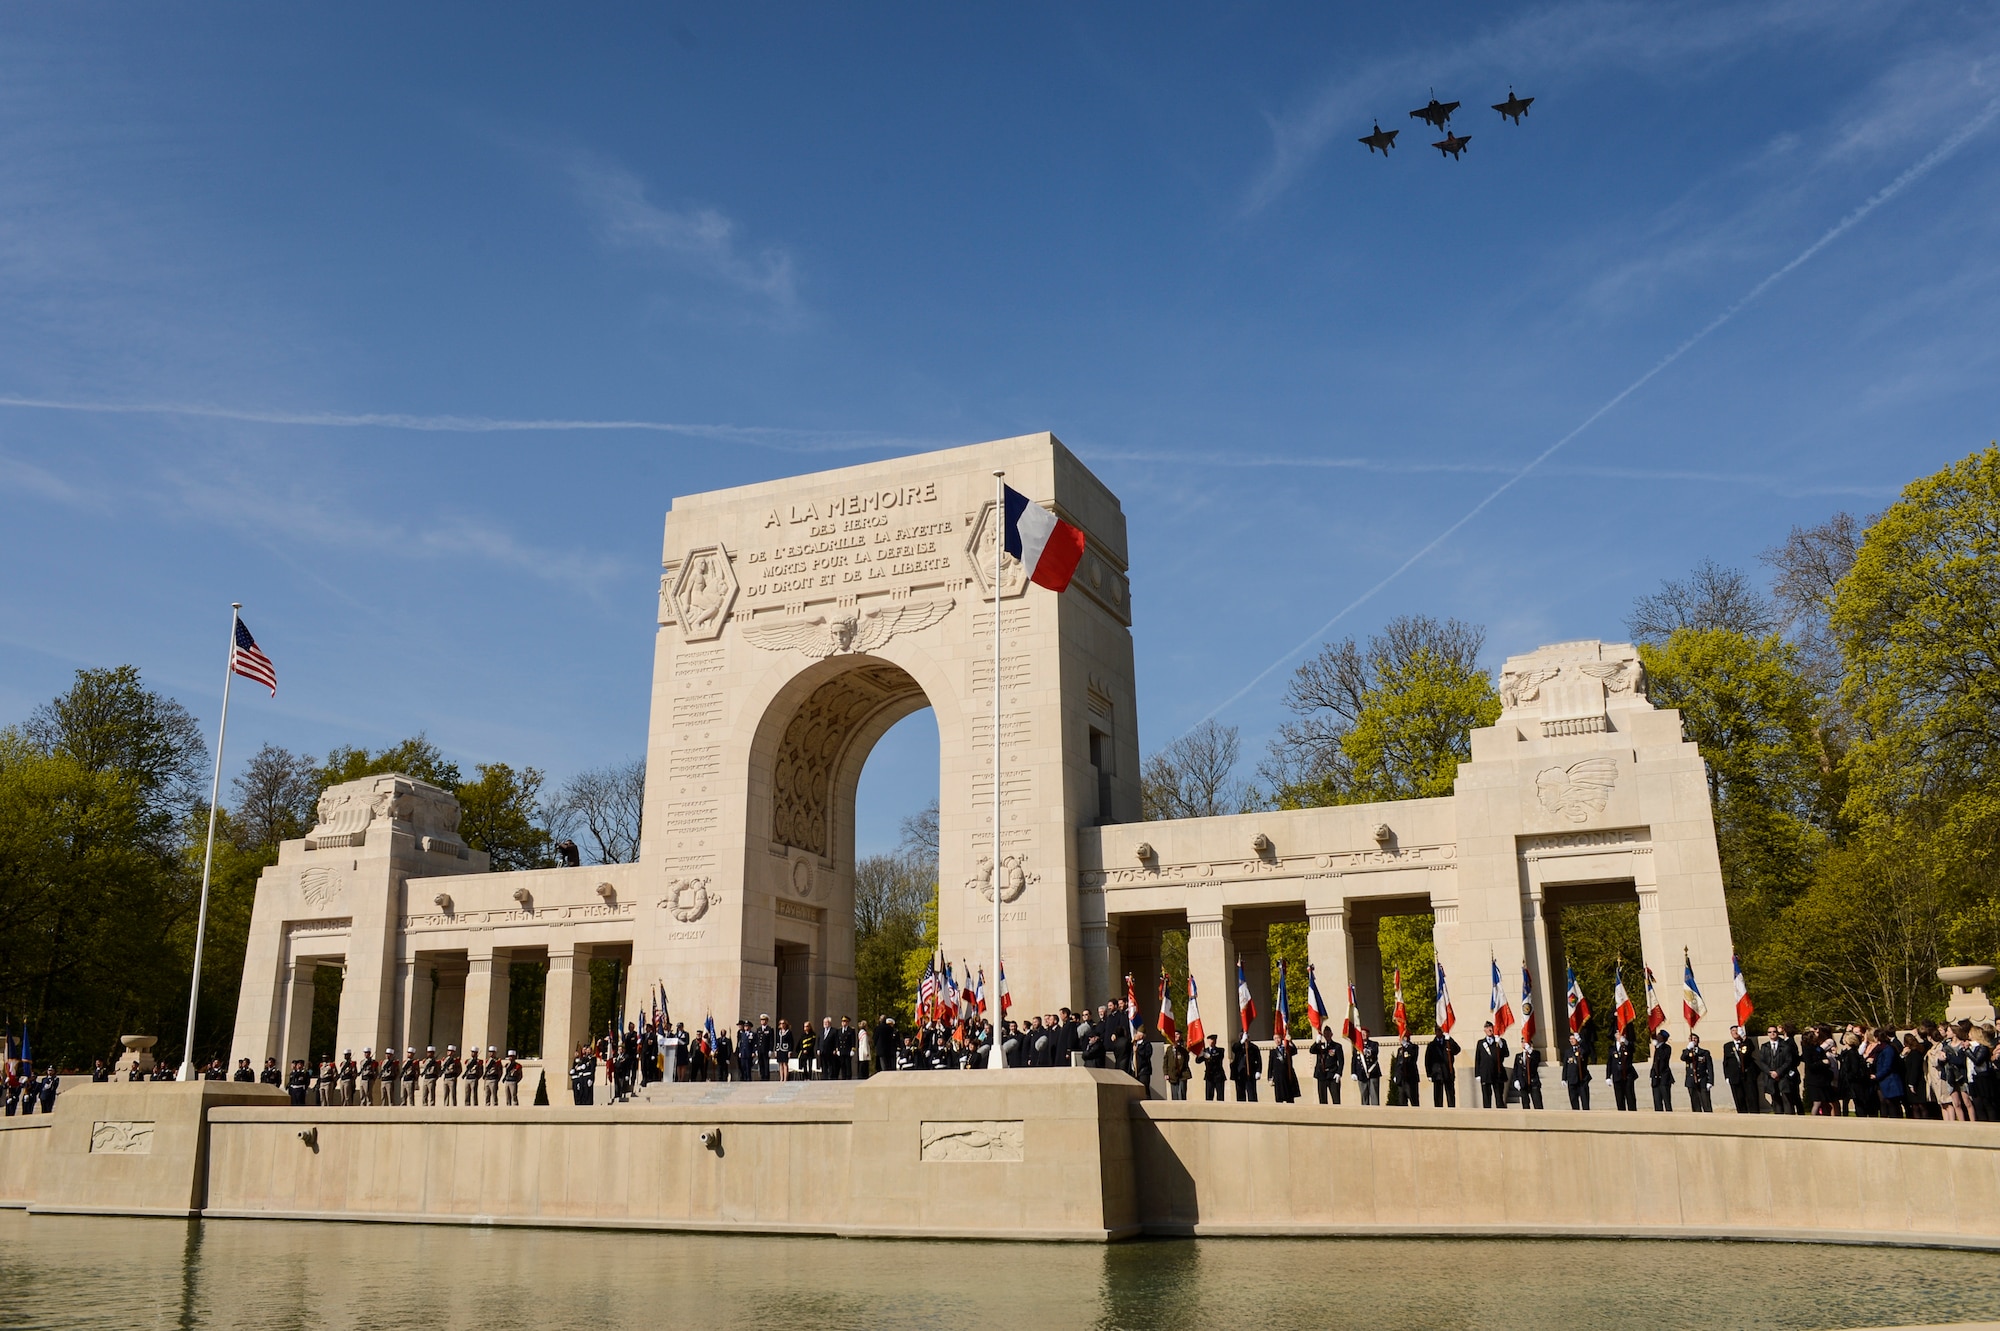 PARIS – Three French Air Force Mirage 2000Ns and one FAF Rafale fly over the Lafayette Escadrille Memorial in Marnes-la-Coquette, France, April 20, 2016, during a ceremony honoring the 268 Americans who joined the FAF during WWI. In addition to the Mirages and Rafale, four U.S. Air Force F-22 Raptor fifth generation fighters, a USAF B-52 Stratofortress bomber, and a World War I-era Stearman PT-17 biplane performed flyovers during the ceremony commemorating the 100th anniversary of the Layfette Escadrille’s formation. Men of the Lafayette Escadrille and Lafayette Flying Crops were critical to the formation of the U.S. Air Force. (U.S. Air Force Photo by Tech. Sgt. Joshua DeMotts/Released)